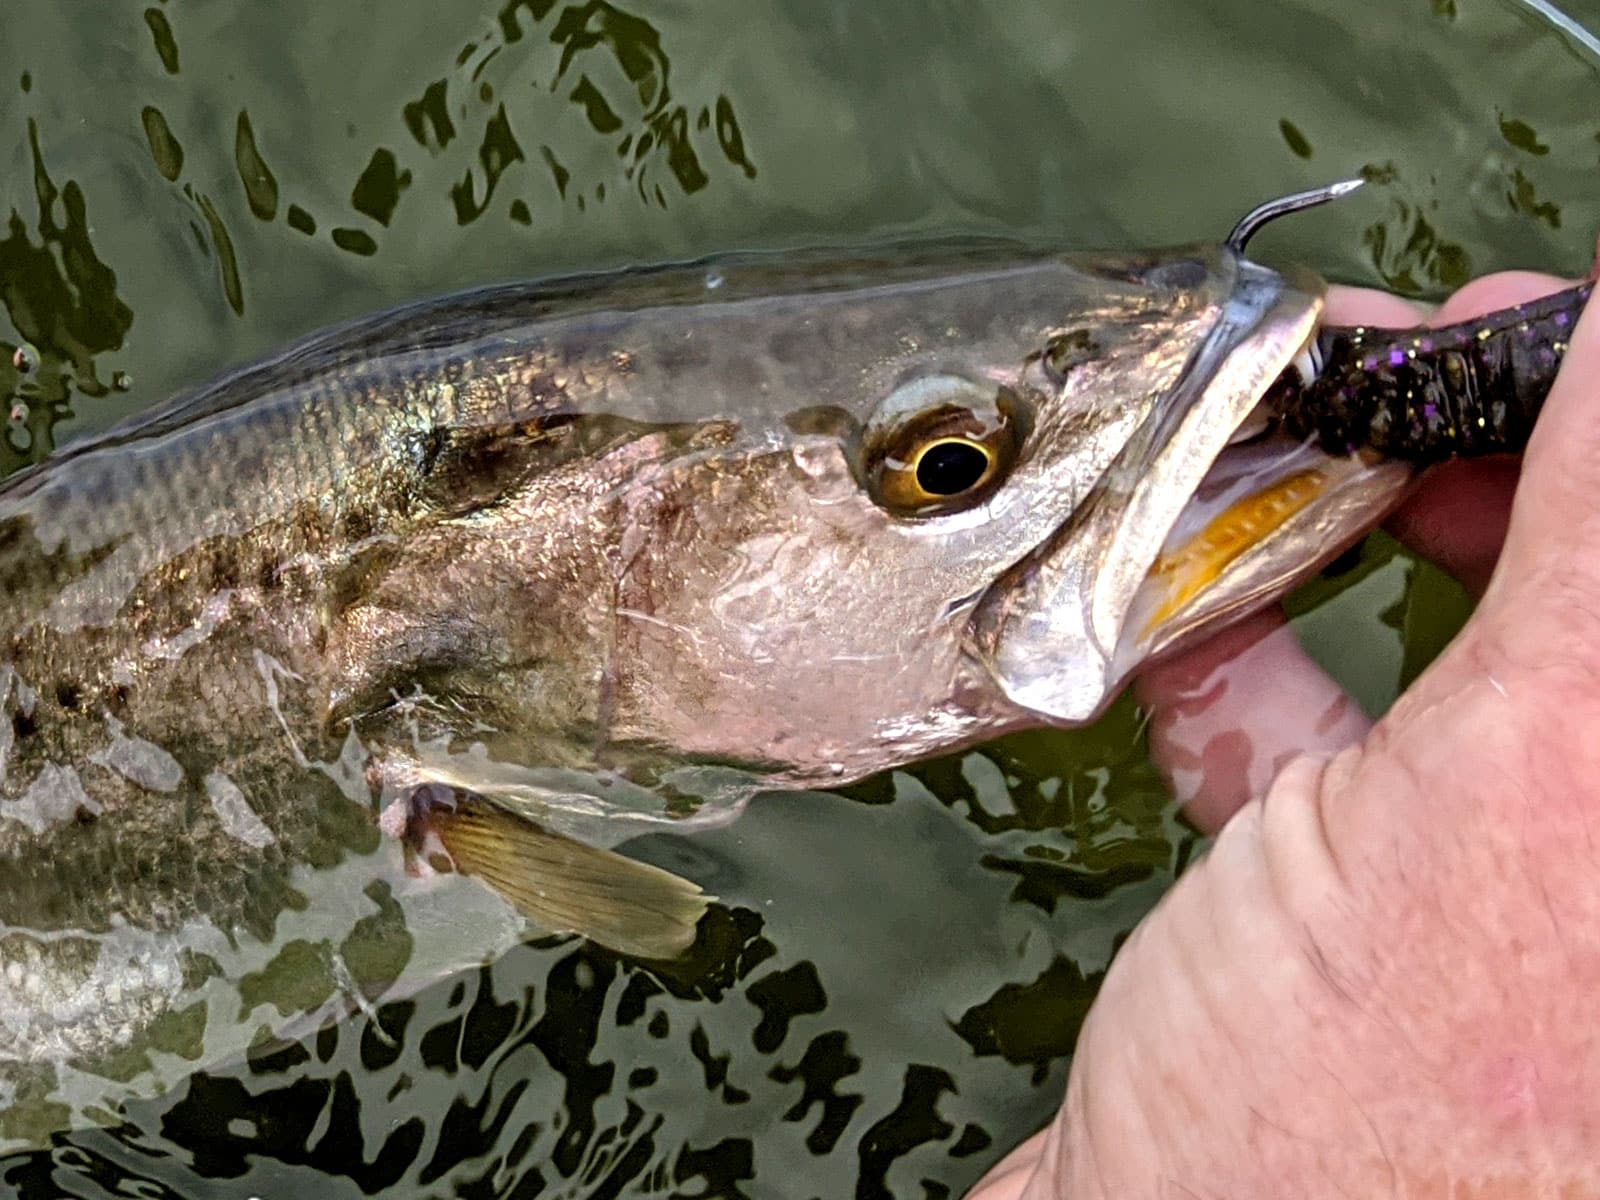 Barbless Hooks Increase Your Catch Trout Fishing in the Smoky Mountains